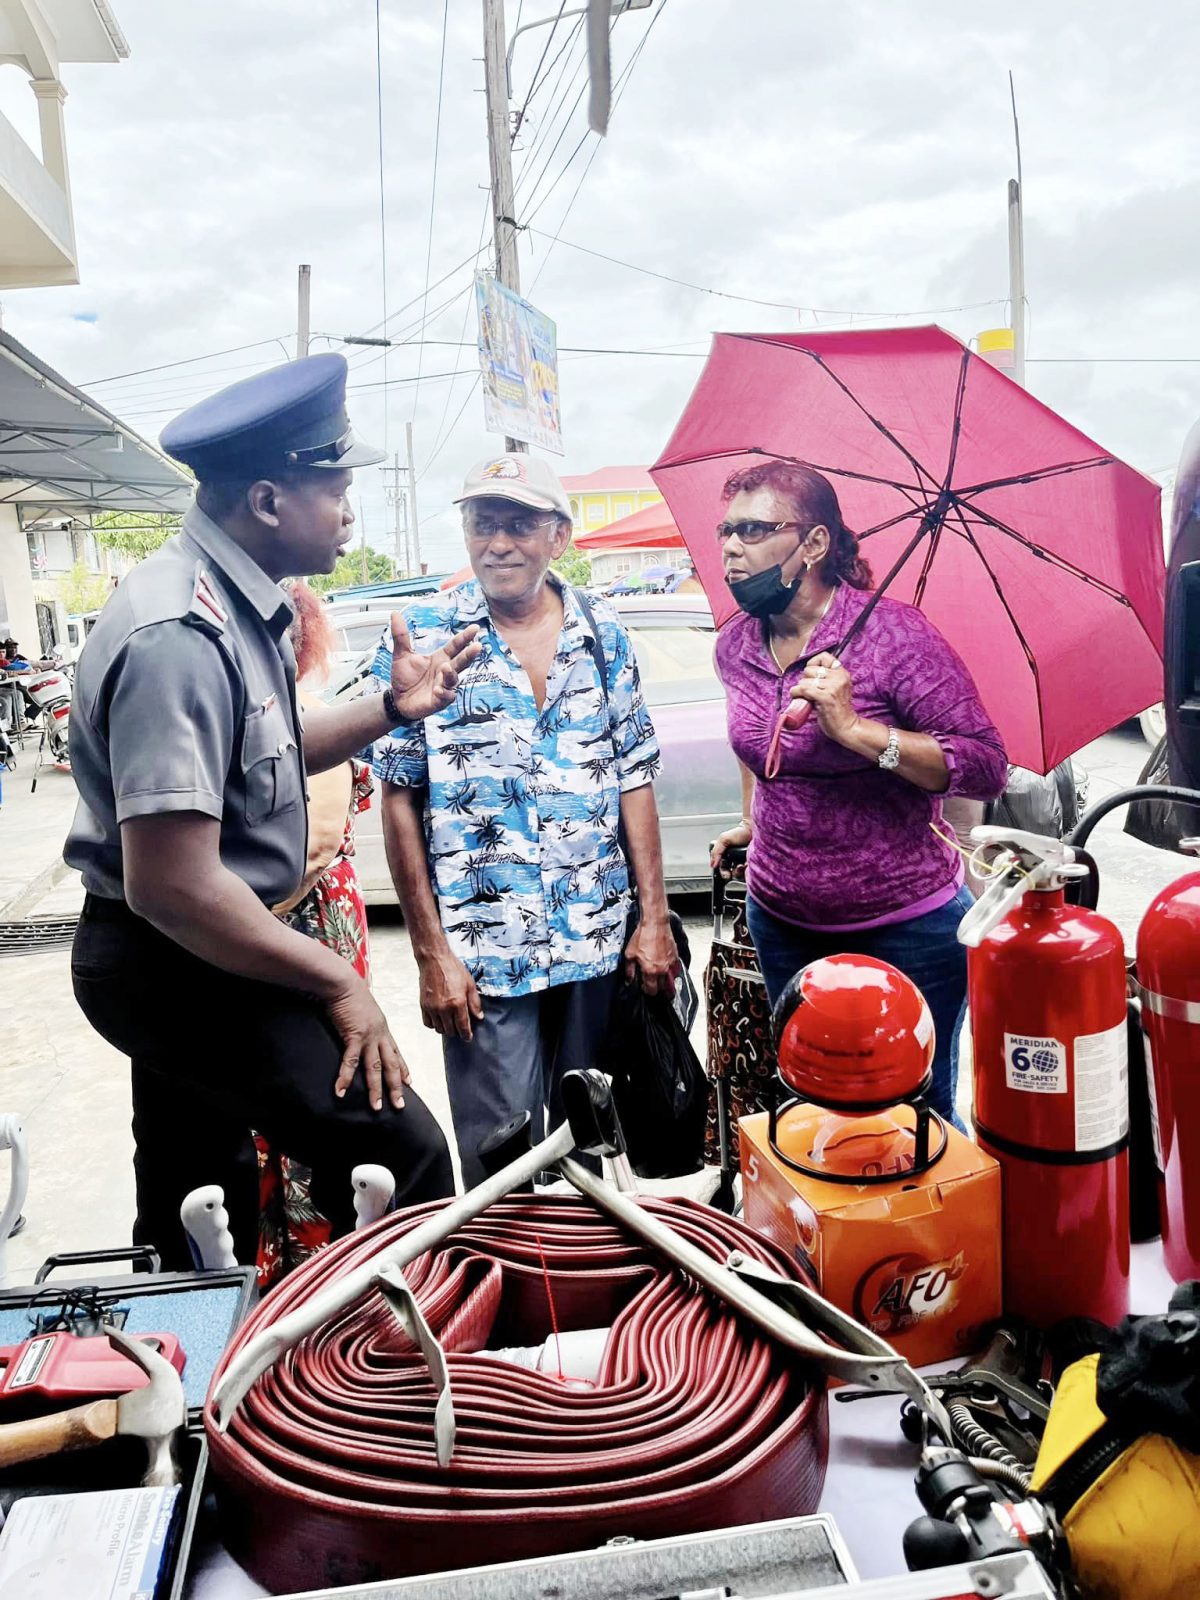  The Guyana Fire Service yesterday said that it interacted with over 500 people at the Mon Repos Market, East Coast Demerara on fire safety and other matters. It said that EMTs also administered free blood pressure and blood sugar testing to 136 individuals. (Guyana Fire and Rescue Service photo)
